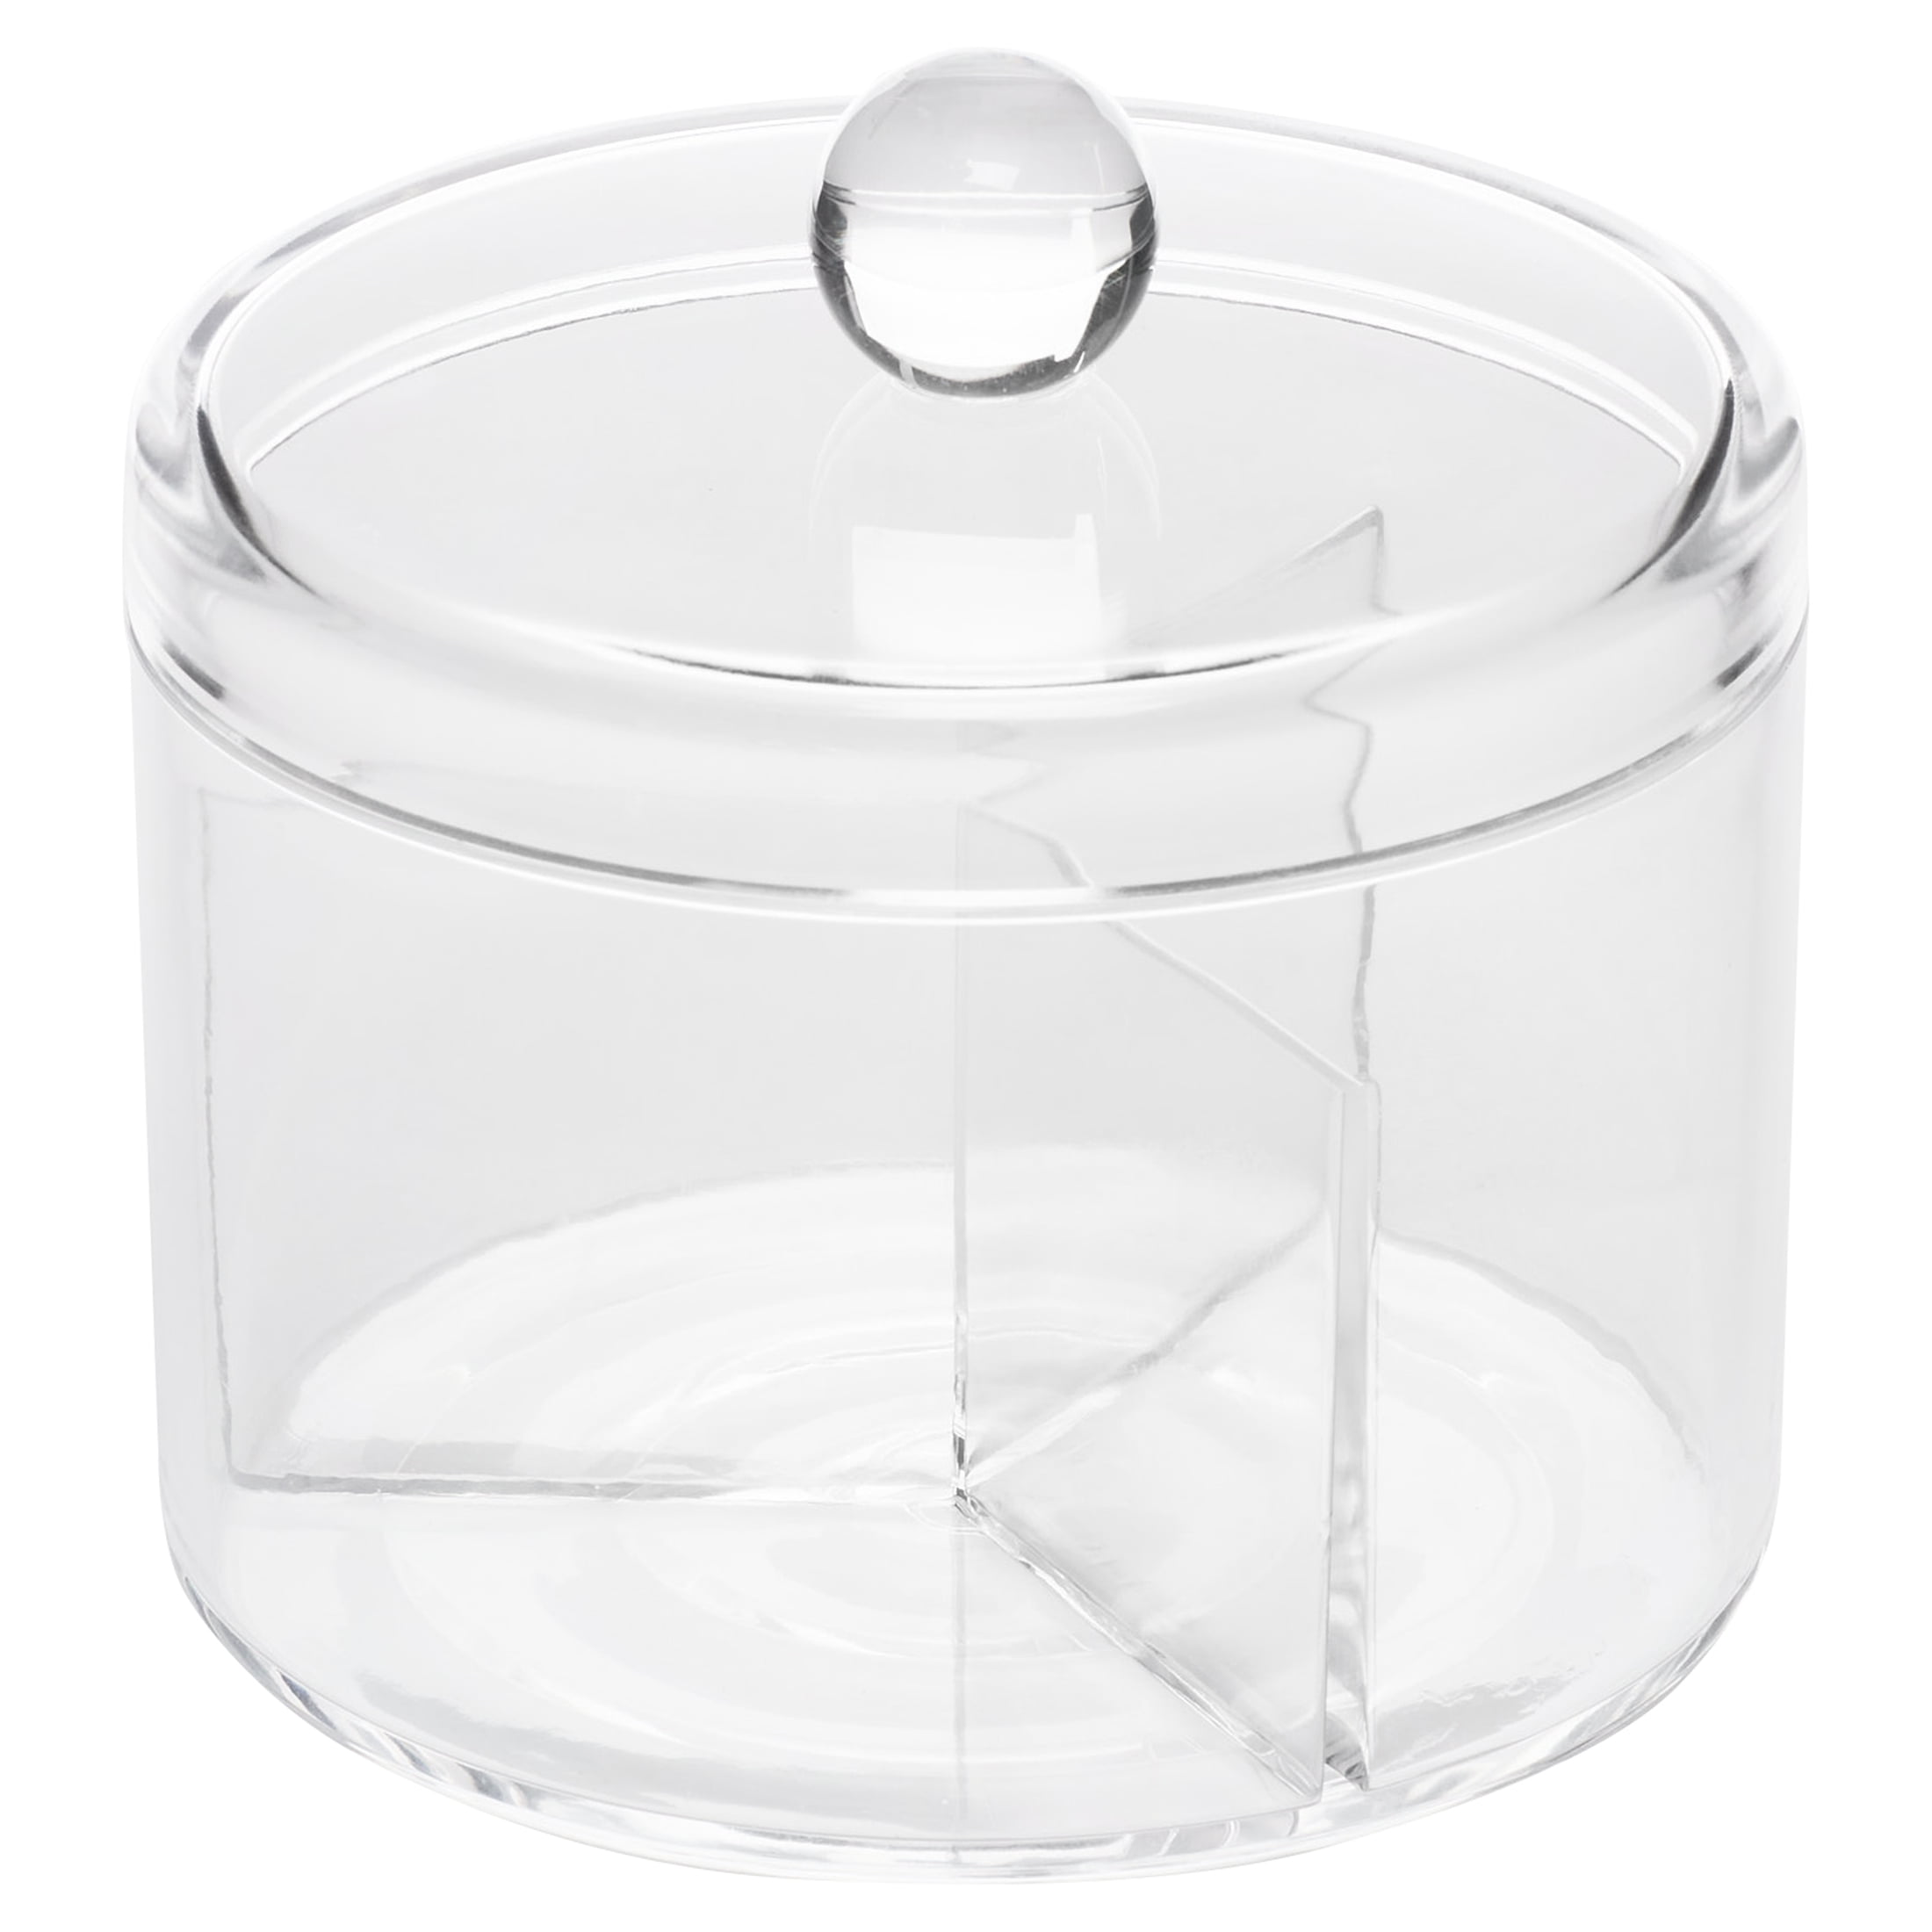 Uxcell Clear Acrylic Plastic Storage Box Square Display Case with Lid, 9.5x9.5x9.5CM Container Box for Small Item, 2pcs